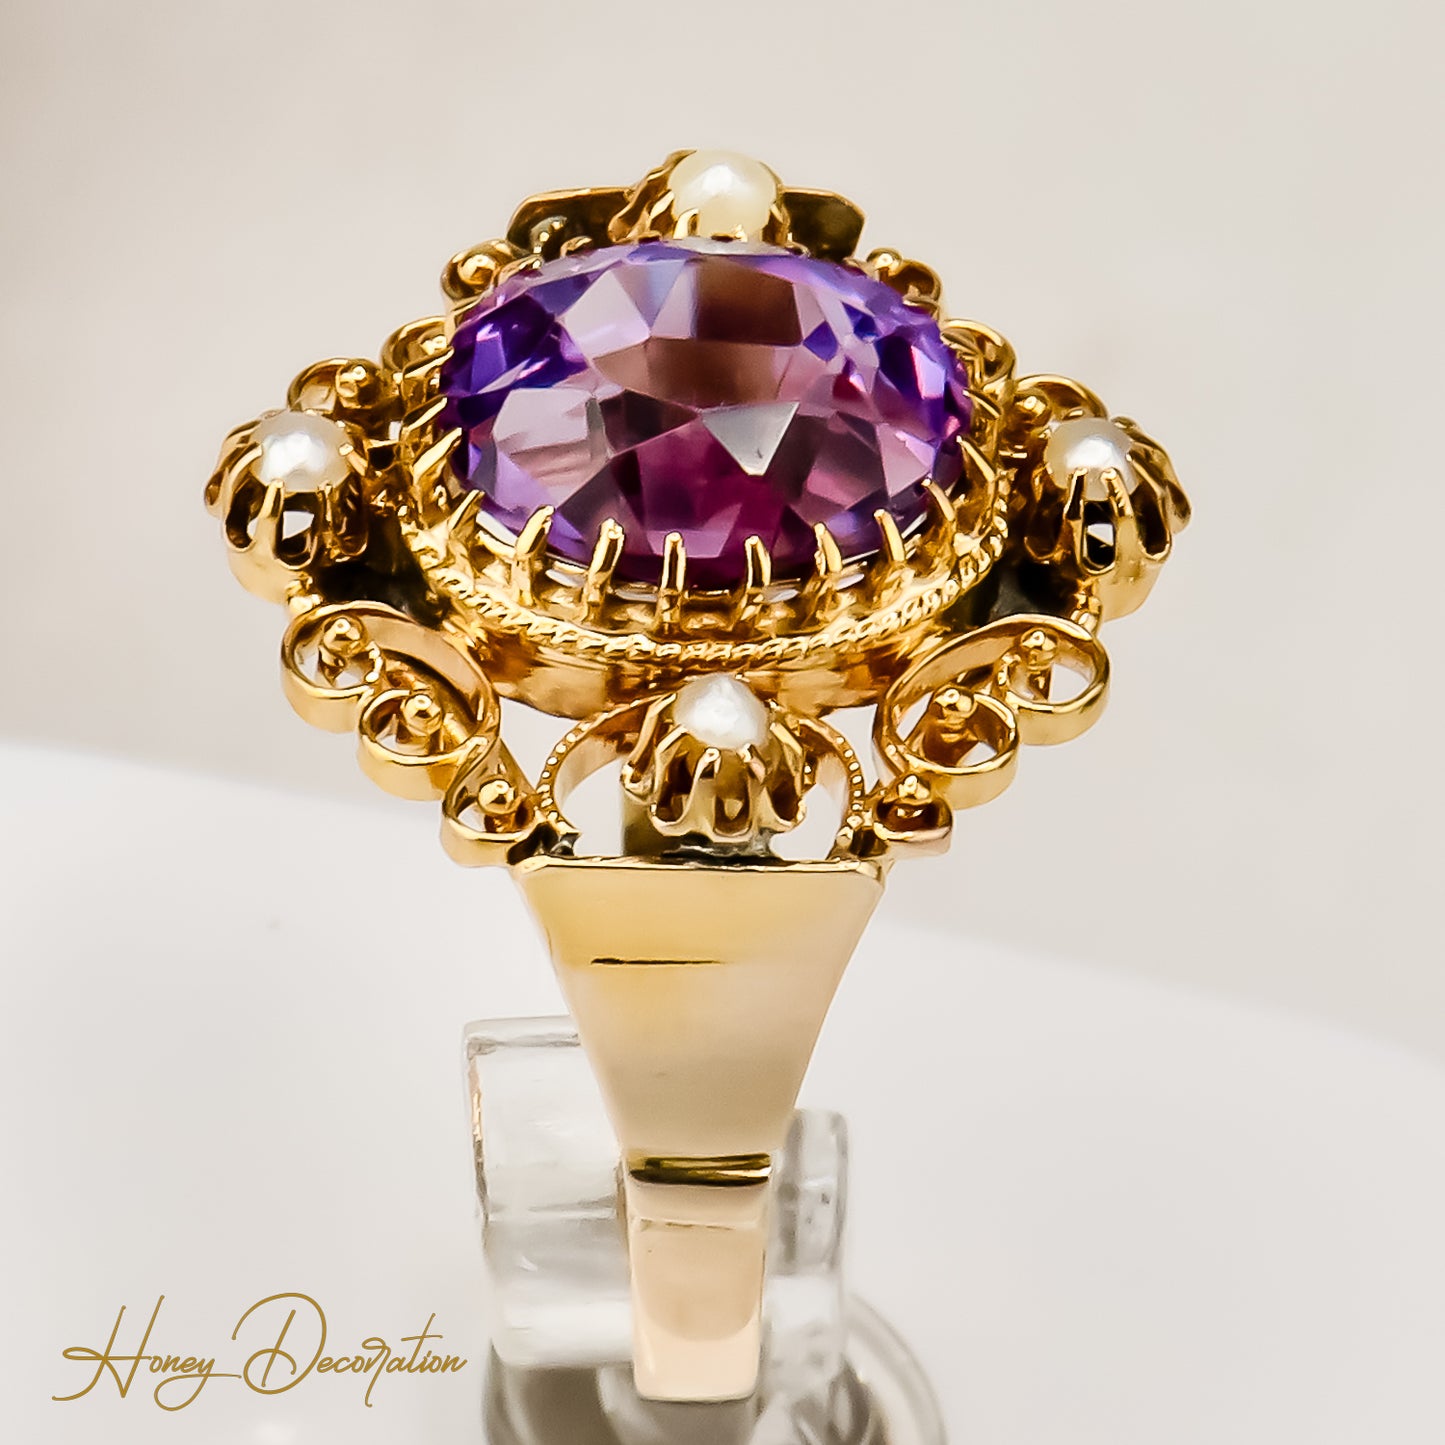 Delicate antique amethystring made of 8 carat gold, a touch of magic